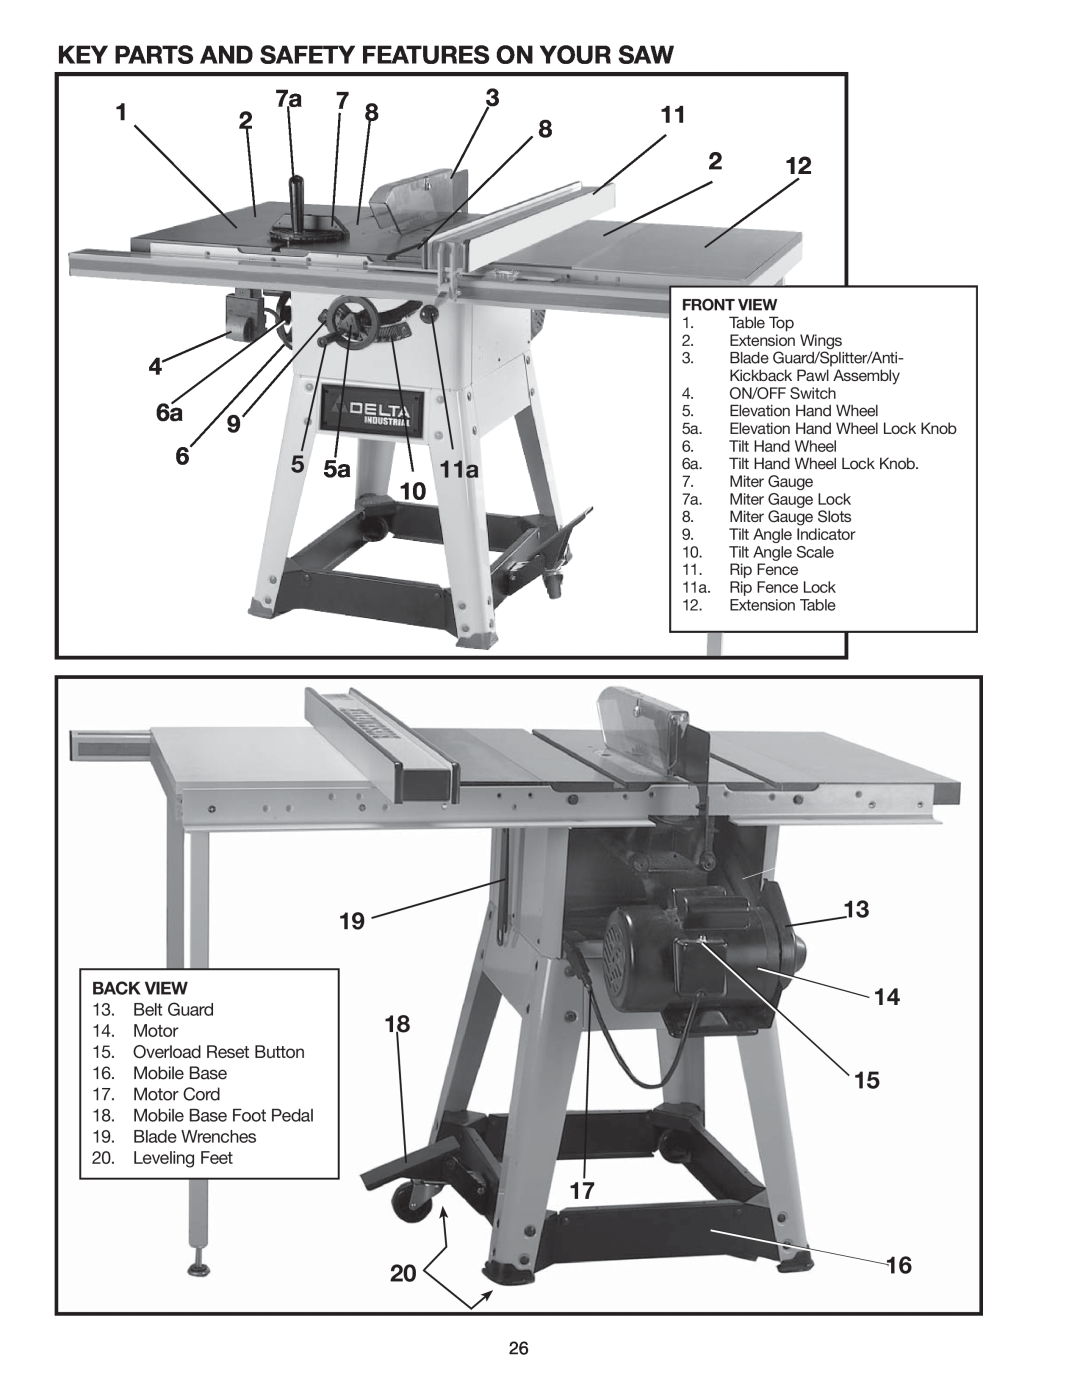 Delta 36-978 instruction manual Key Parts And Safety Features On Your Saw 